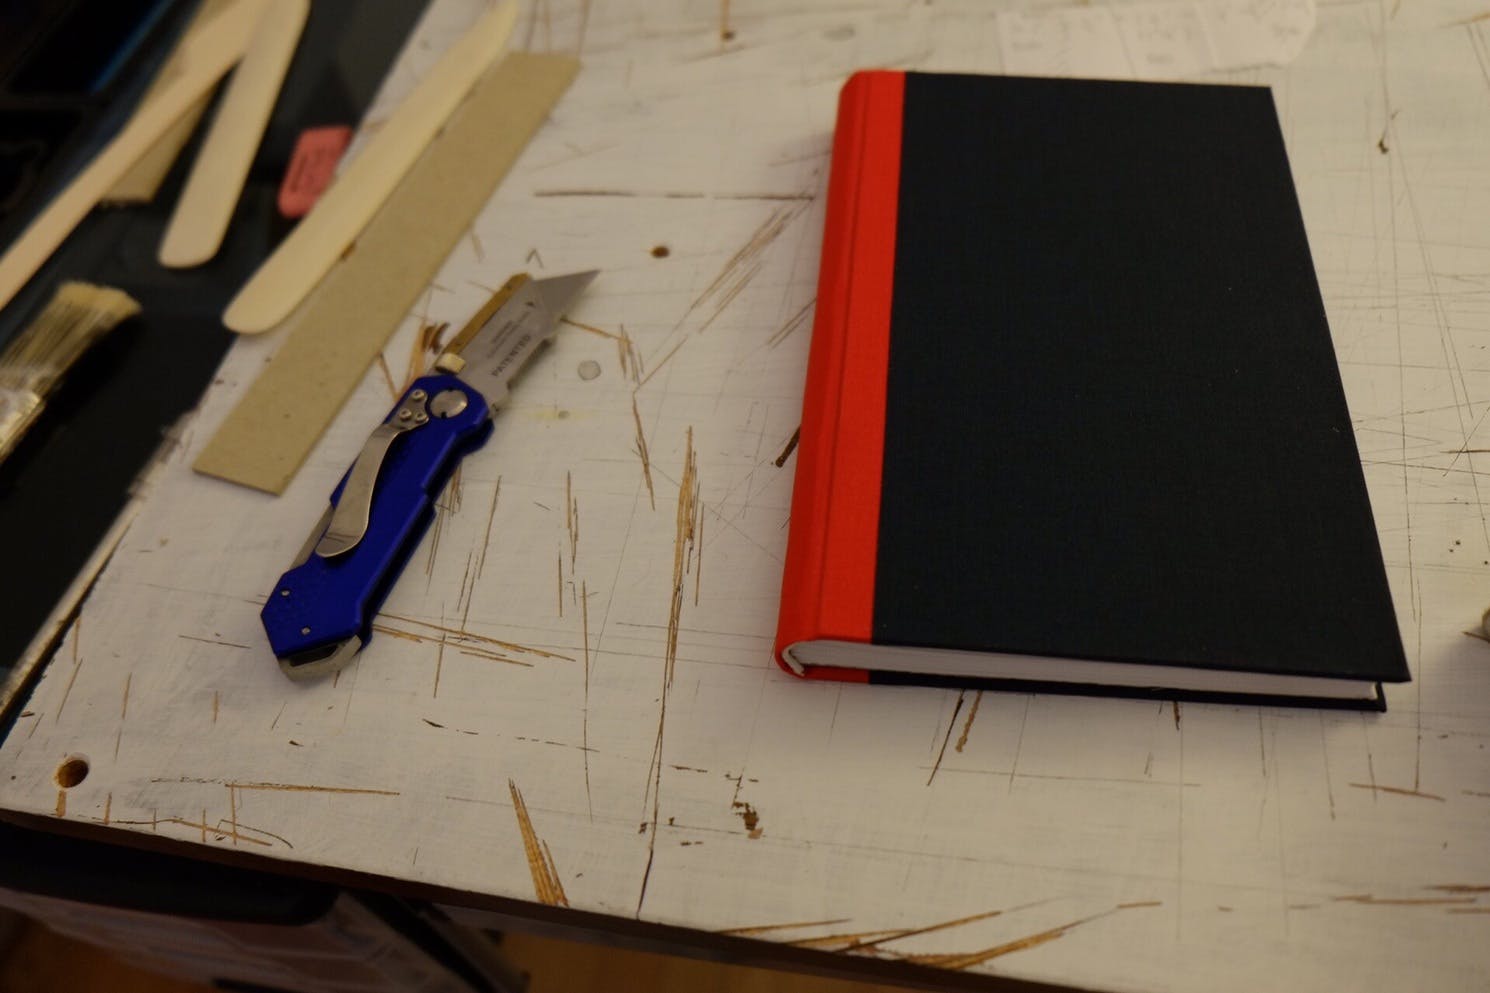 Andy’s new journal, sitting alongside a knife, bone folder, and some scraps of cardboard 